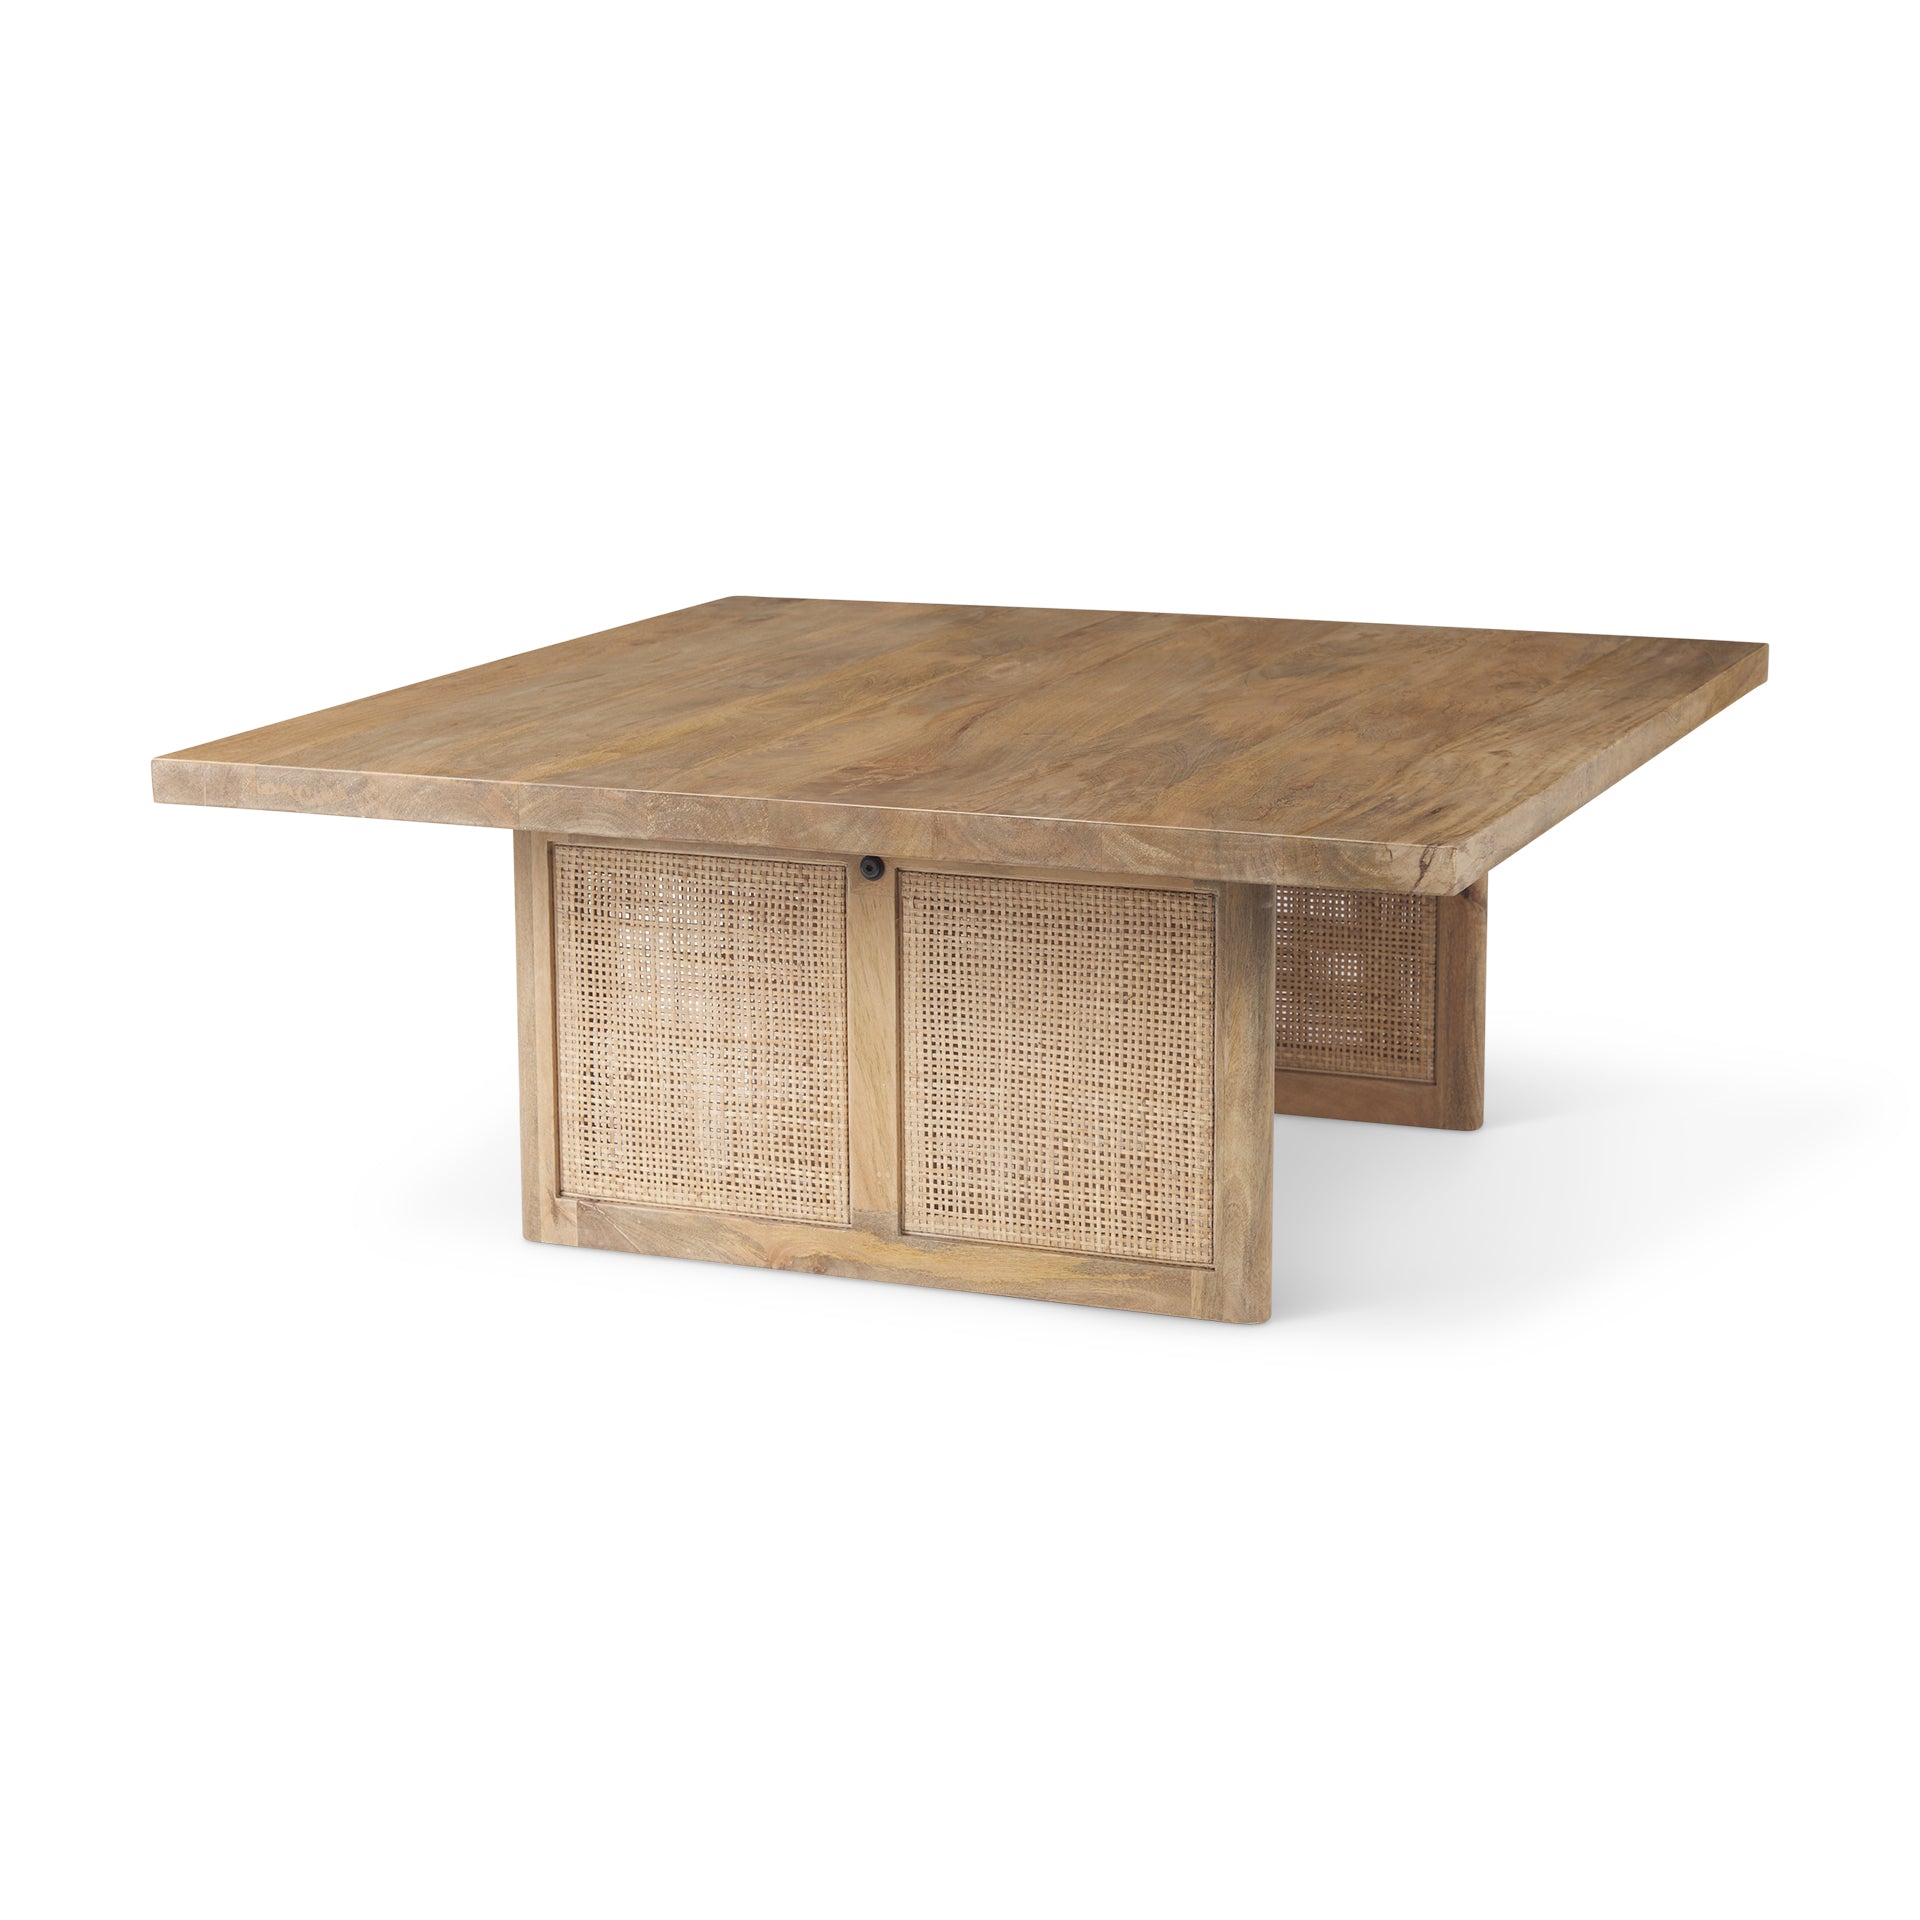 GRIER COFFEE TABLE - LIGHT BROWN